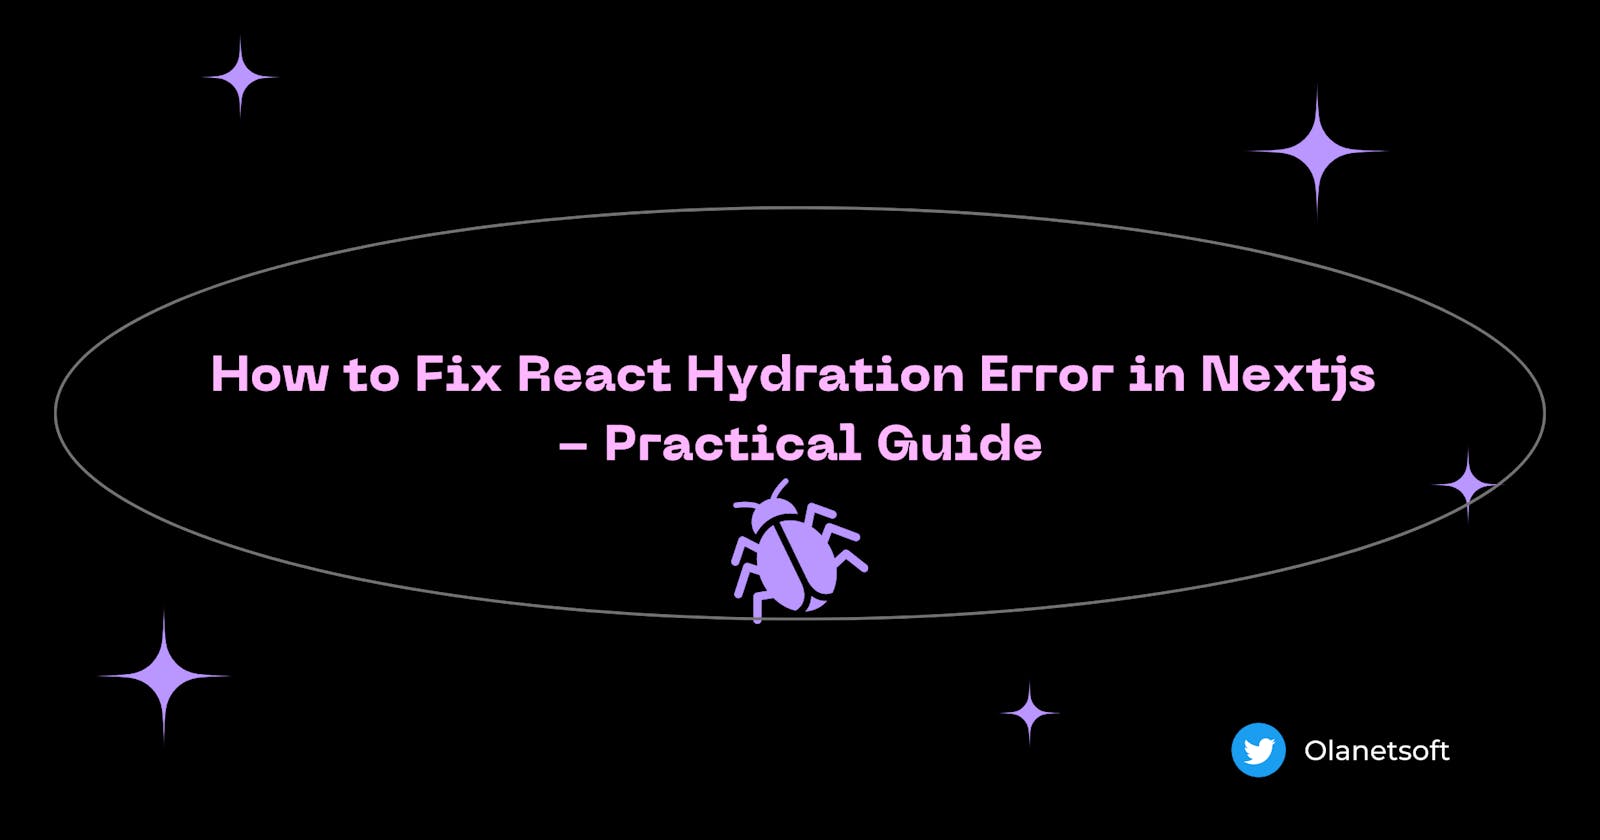 How to Fix React Hydration Error in Nextjs - Practical Guide